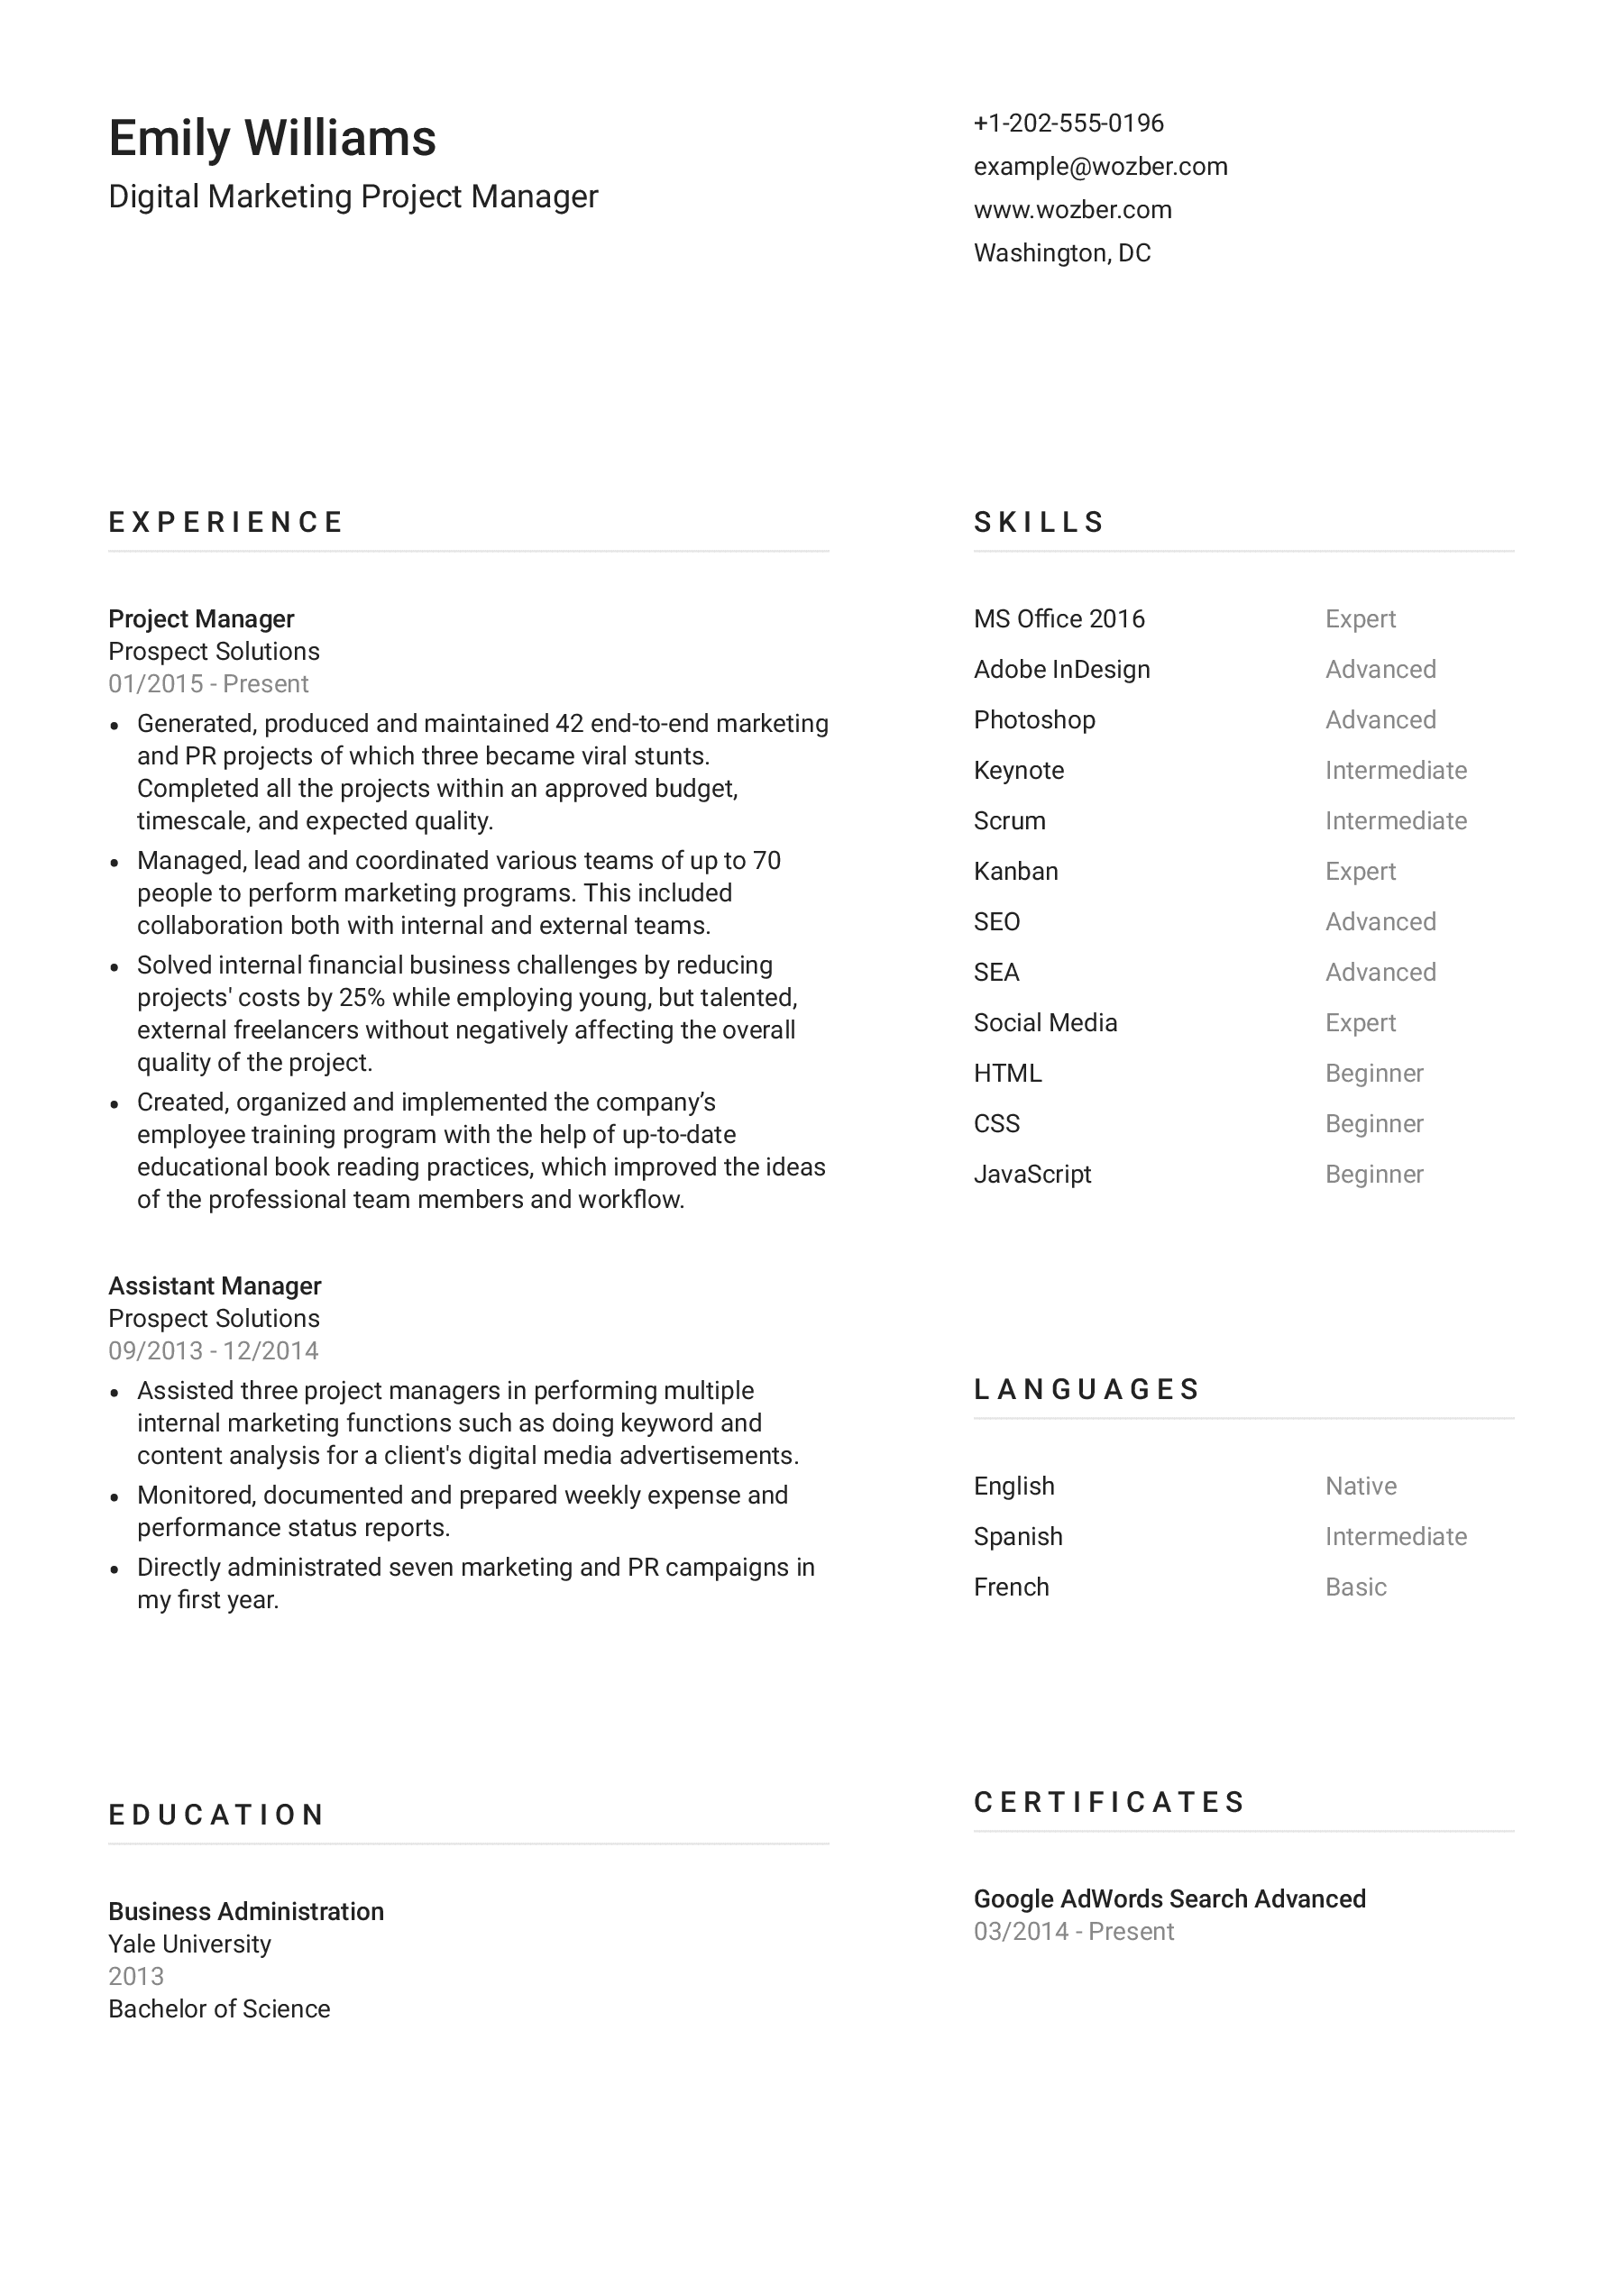 A two-column resume template with minimalistic design for professionals who seek to fit more content into one page.